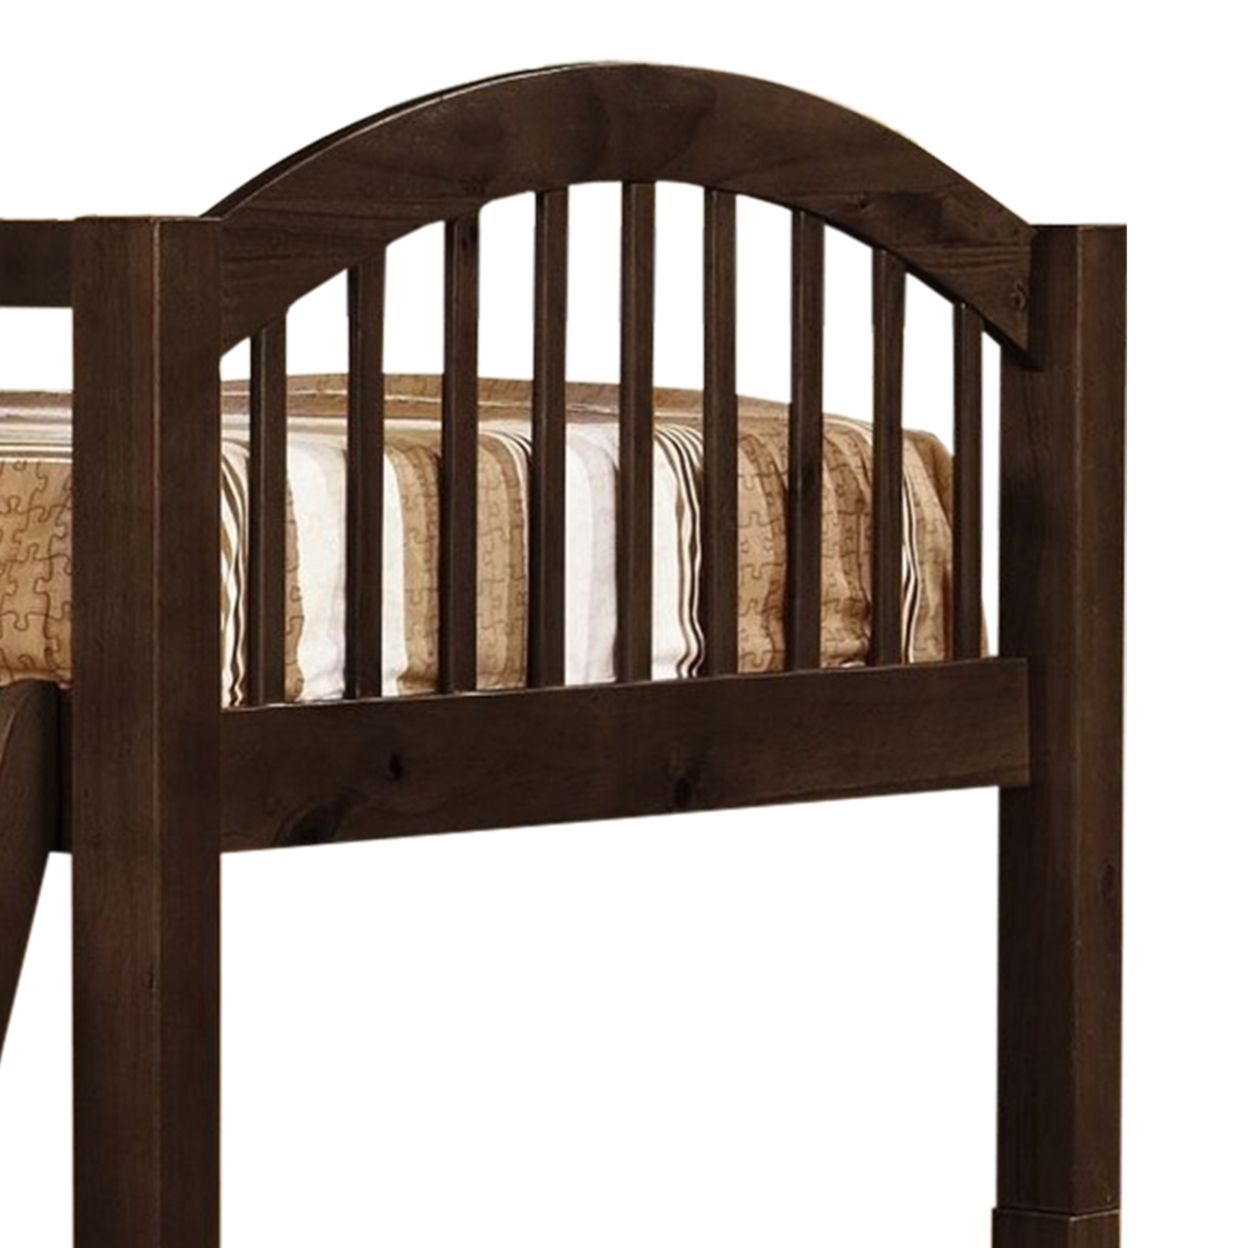 Wooden Twin Over Twin Bunk Bed With Slatted Arched Headboard, Dark Brown- Saltoro Sherpi